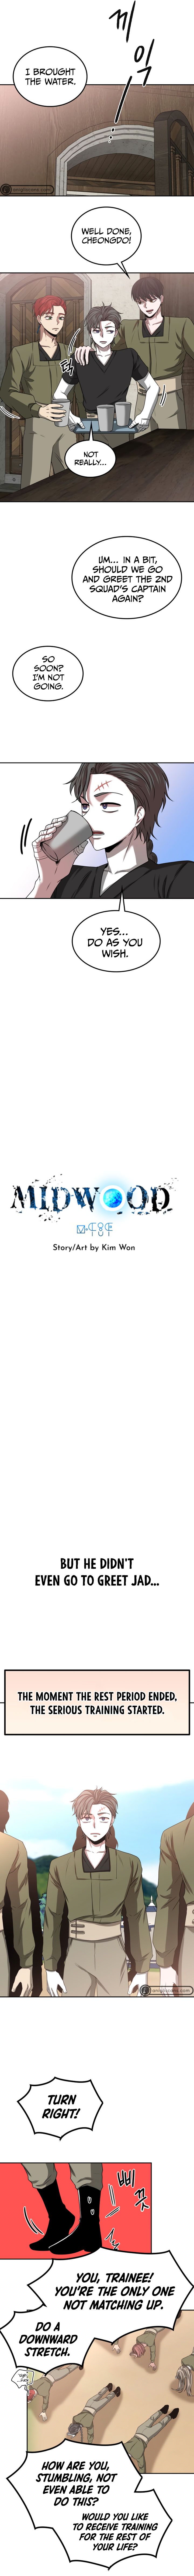 Midwood - Page 3